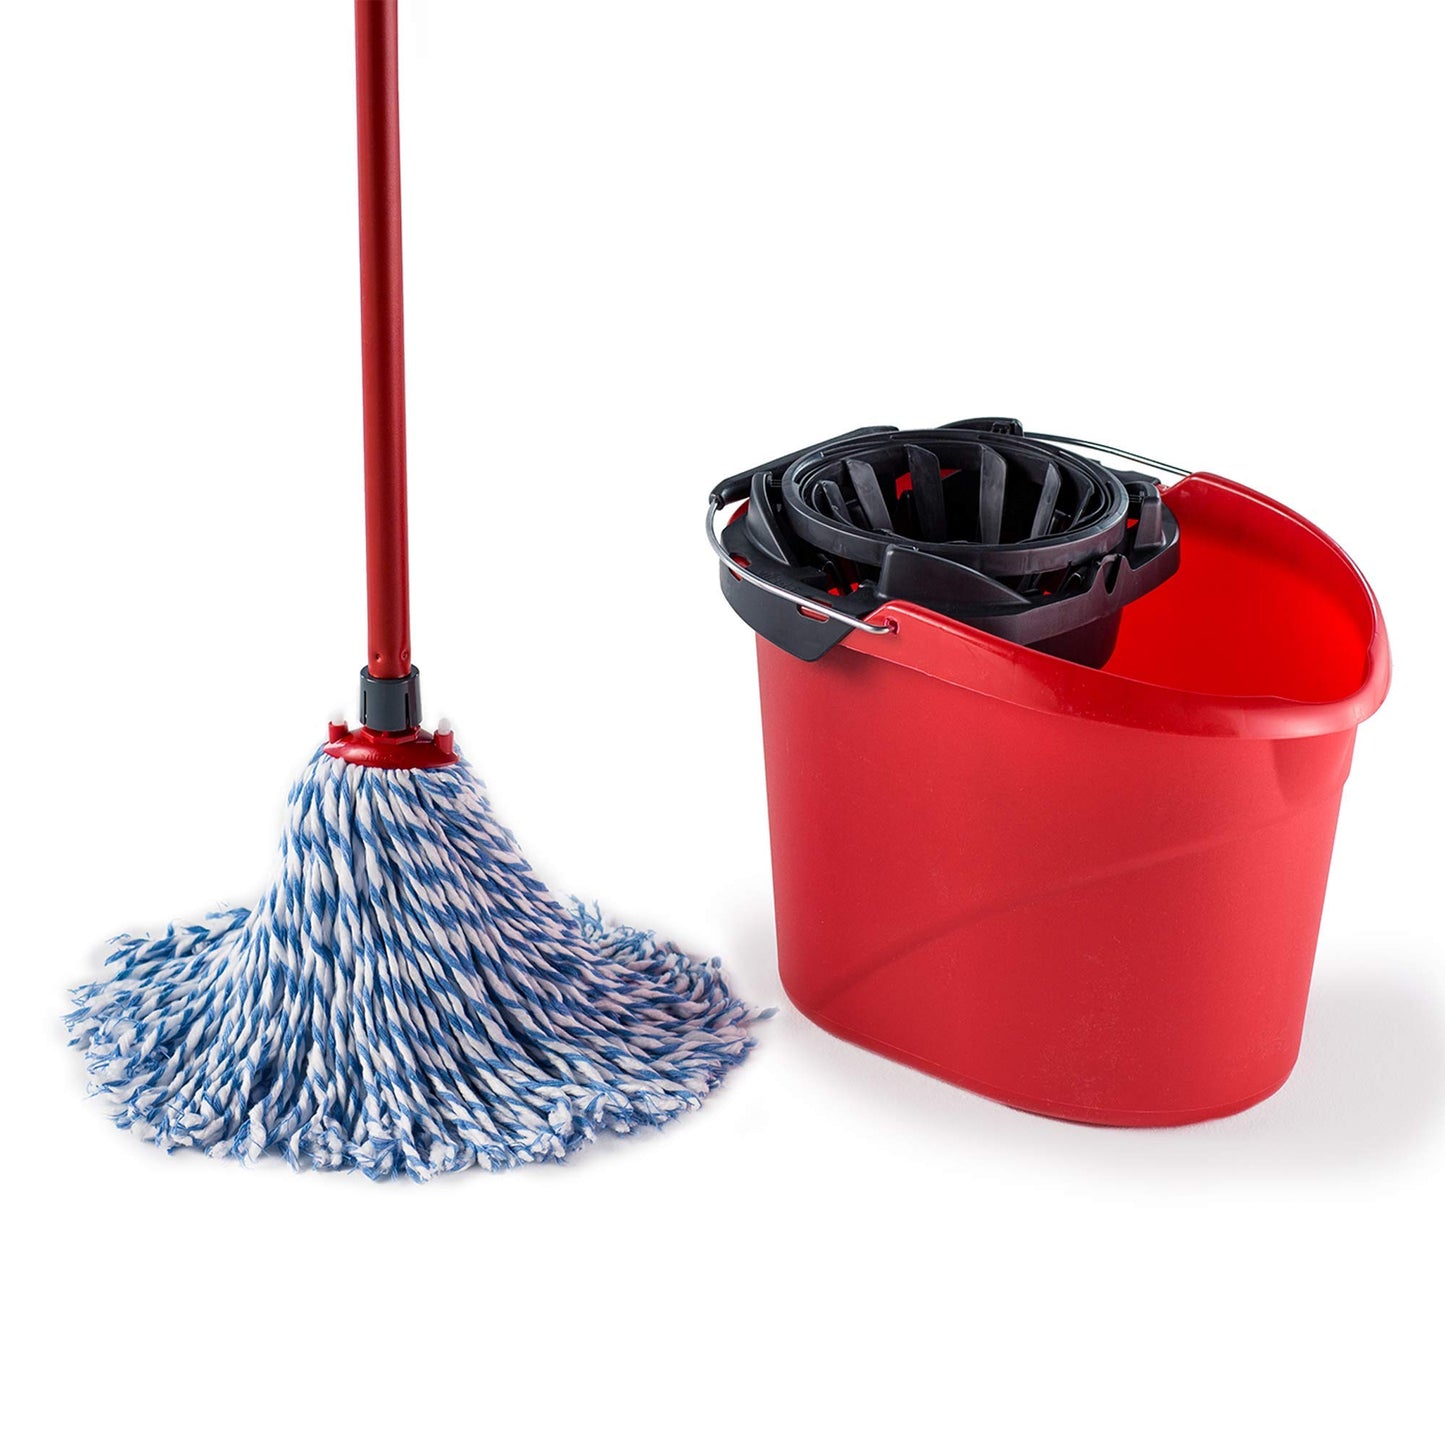 Vileda SuperMocio Microfibre and Cotton Mop and Bucket Set, Mop for Cleaning Floors, Set of 1x Mop and 1x Bucket, Red/Black, 28.3cm (W) x40cm (D) x28.5cm (H)